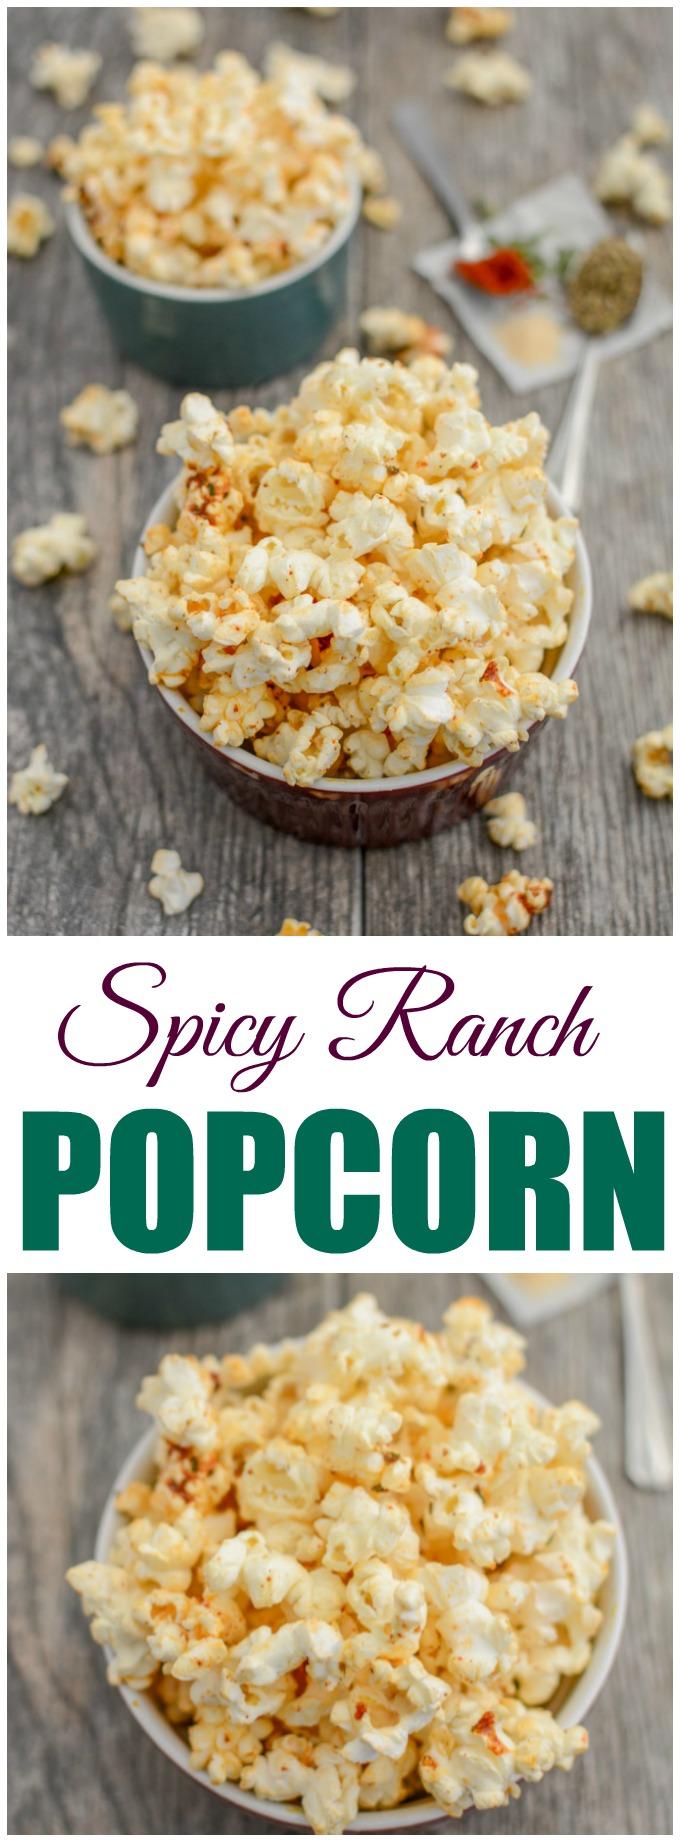 This recipe for Spicy Ranch Popcorn is a helpful snack to keep on hand if you’re trying to quit smoking and an urge to smoke strikes! Stash some at work or in your purse to get you through a long afternoon!